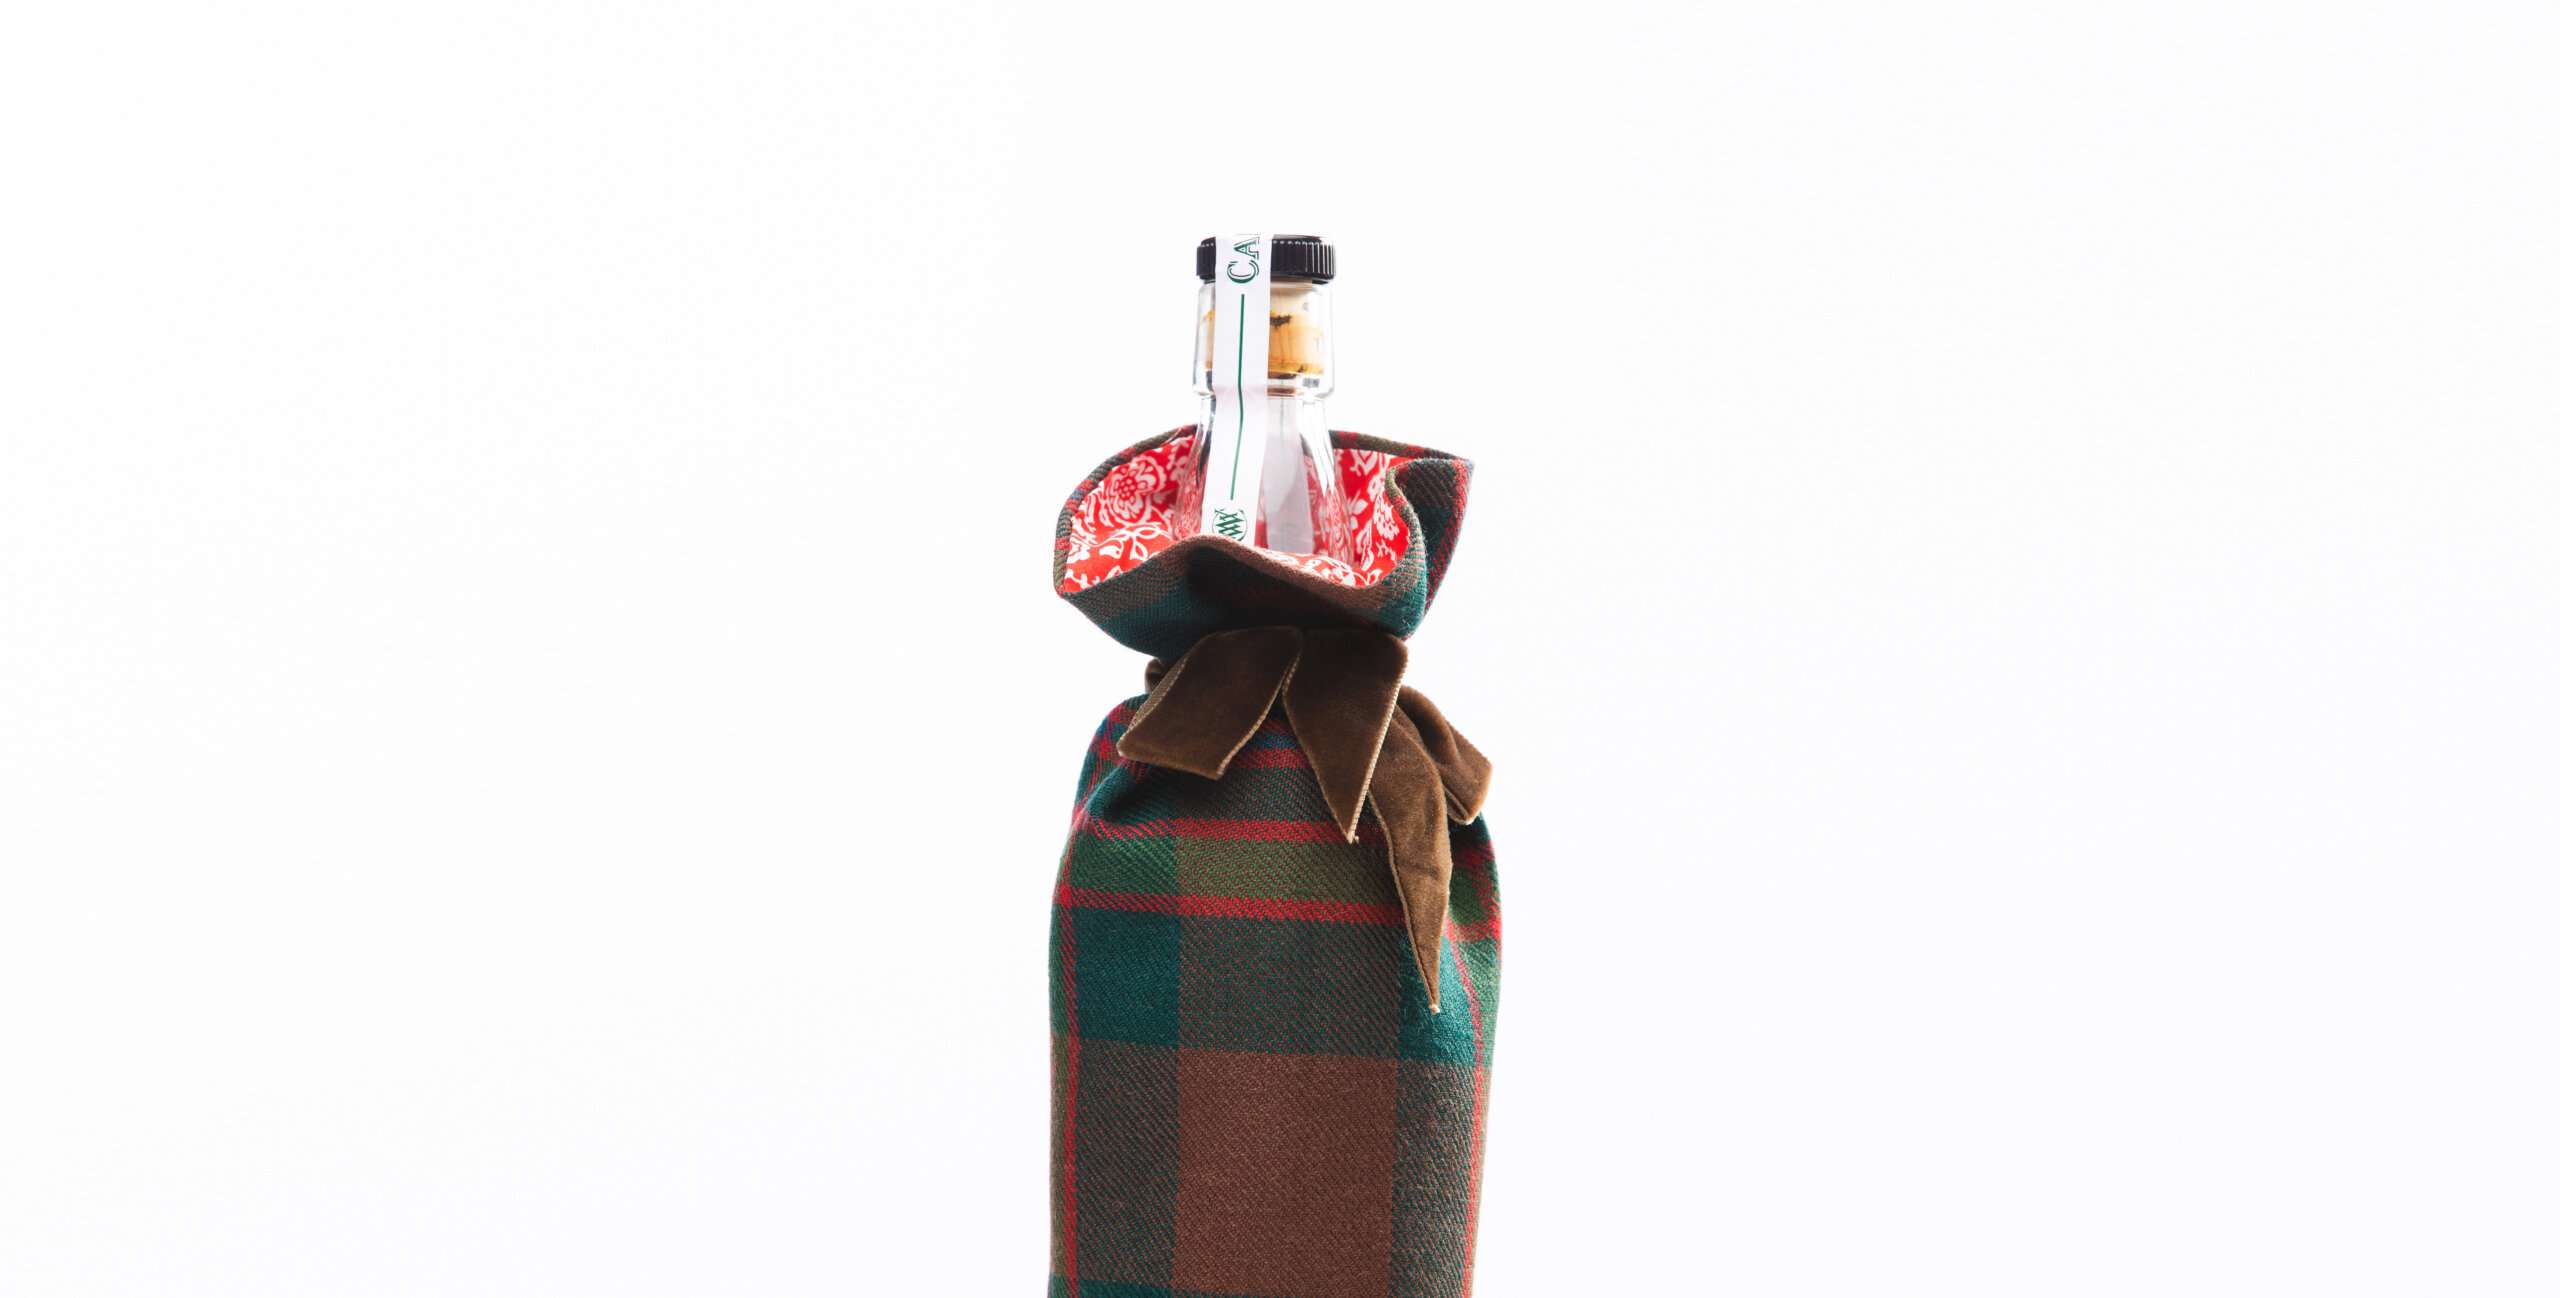 LoullyMakes Xmas produts 15 Banner scaled Many of us like to show our appreciation of friends, family , neighbours, colleagues & associates by giving a gift of the recipients favourite bottled refreshment - but a bottle isnt always an easy gift to wrap ! With these pretty, useful AND re-usable handmade Bottle Covers, however, you have a quick , easy and suitably seasonal solution ! Carefully handmade in our exclusive John Muir Way tartan, fully lined in a beautiful Liberty Art Fabric and finished with a gorgeous velvet ribbon tie-closure. They easily fit most average wine, whisky, spirit bottles (75cl-1L size) and can be re-used over and over again ! Please note the printed tana lawn lining and ribbon colour may vary from those pictured, but will always compliment the tartan.